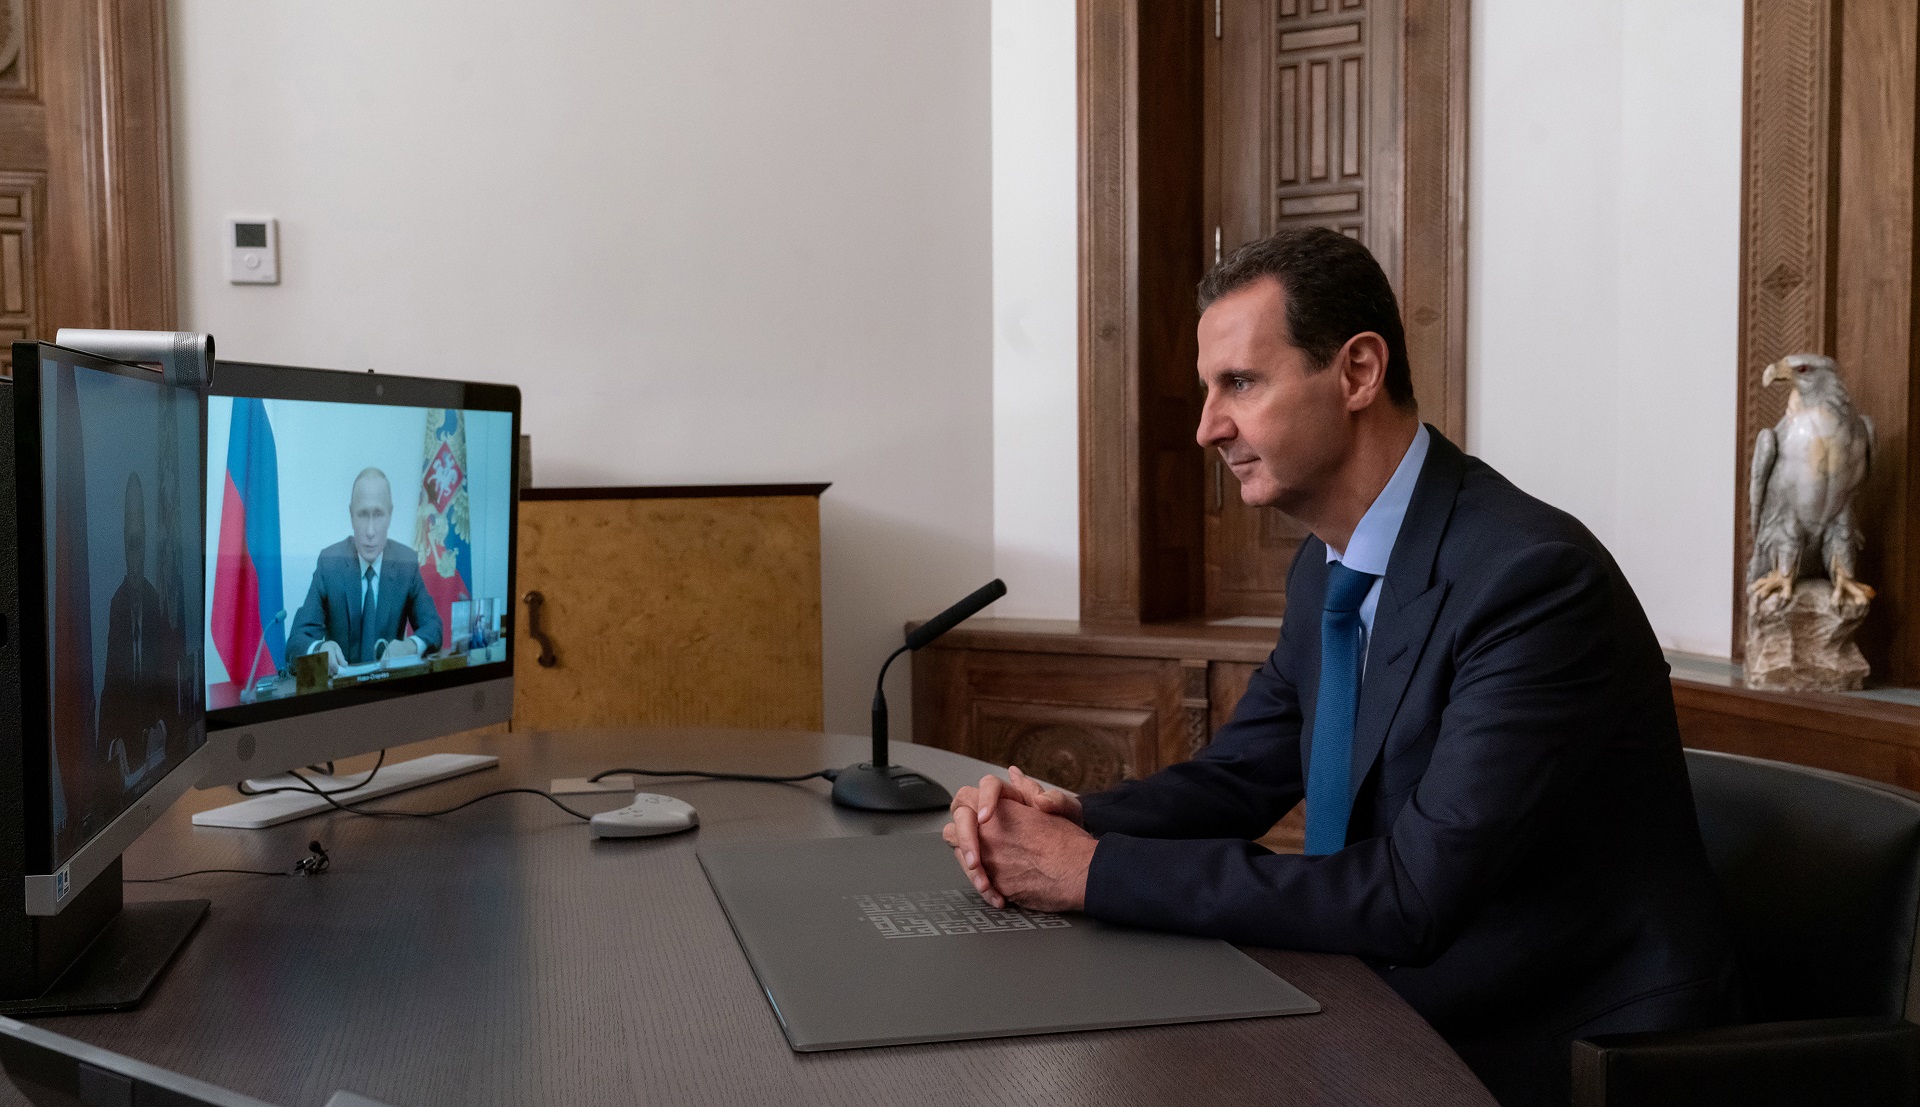 epa08809512 A handout photo made available by the Syrian Presidency shows Syrian President Bashar Assad during a video meeting with his Russian Counterpart Vladimir Putin, in Damascus, Syria, 09 November 2020.  on 9 November 2020. Assad said the upcoming Conference on Refugees Return scheduled to be held in Damascus will be the beginning of solving this humanitarian issue.  EPA/Syrian Presidency HANDOUT  HANDOUT EDITORIAL USE ONLY/NO SALES